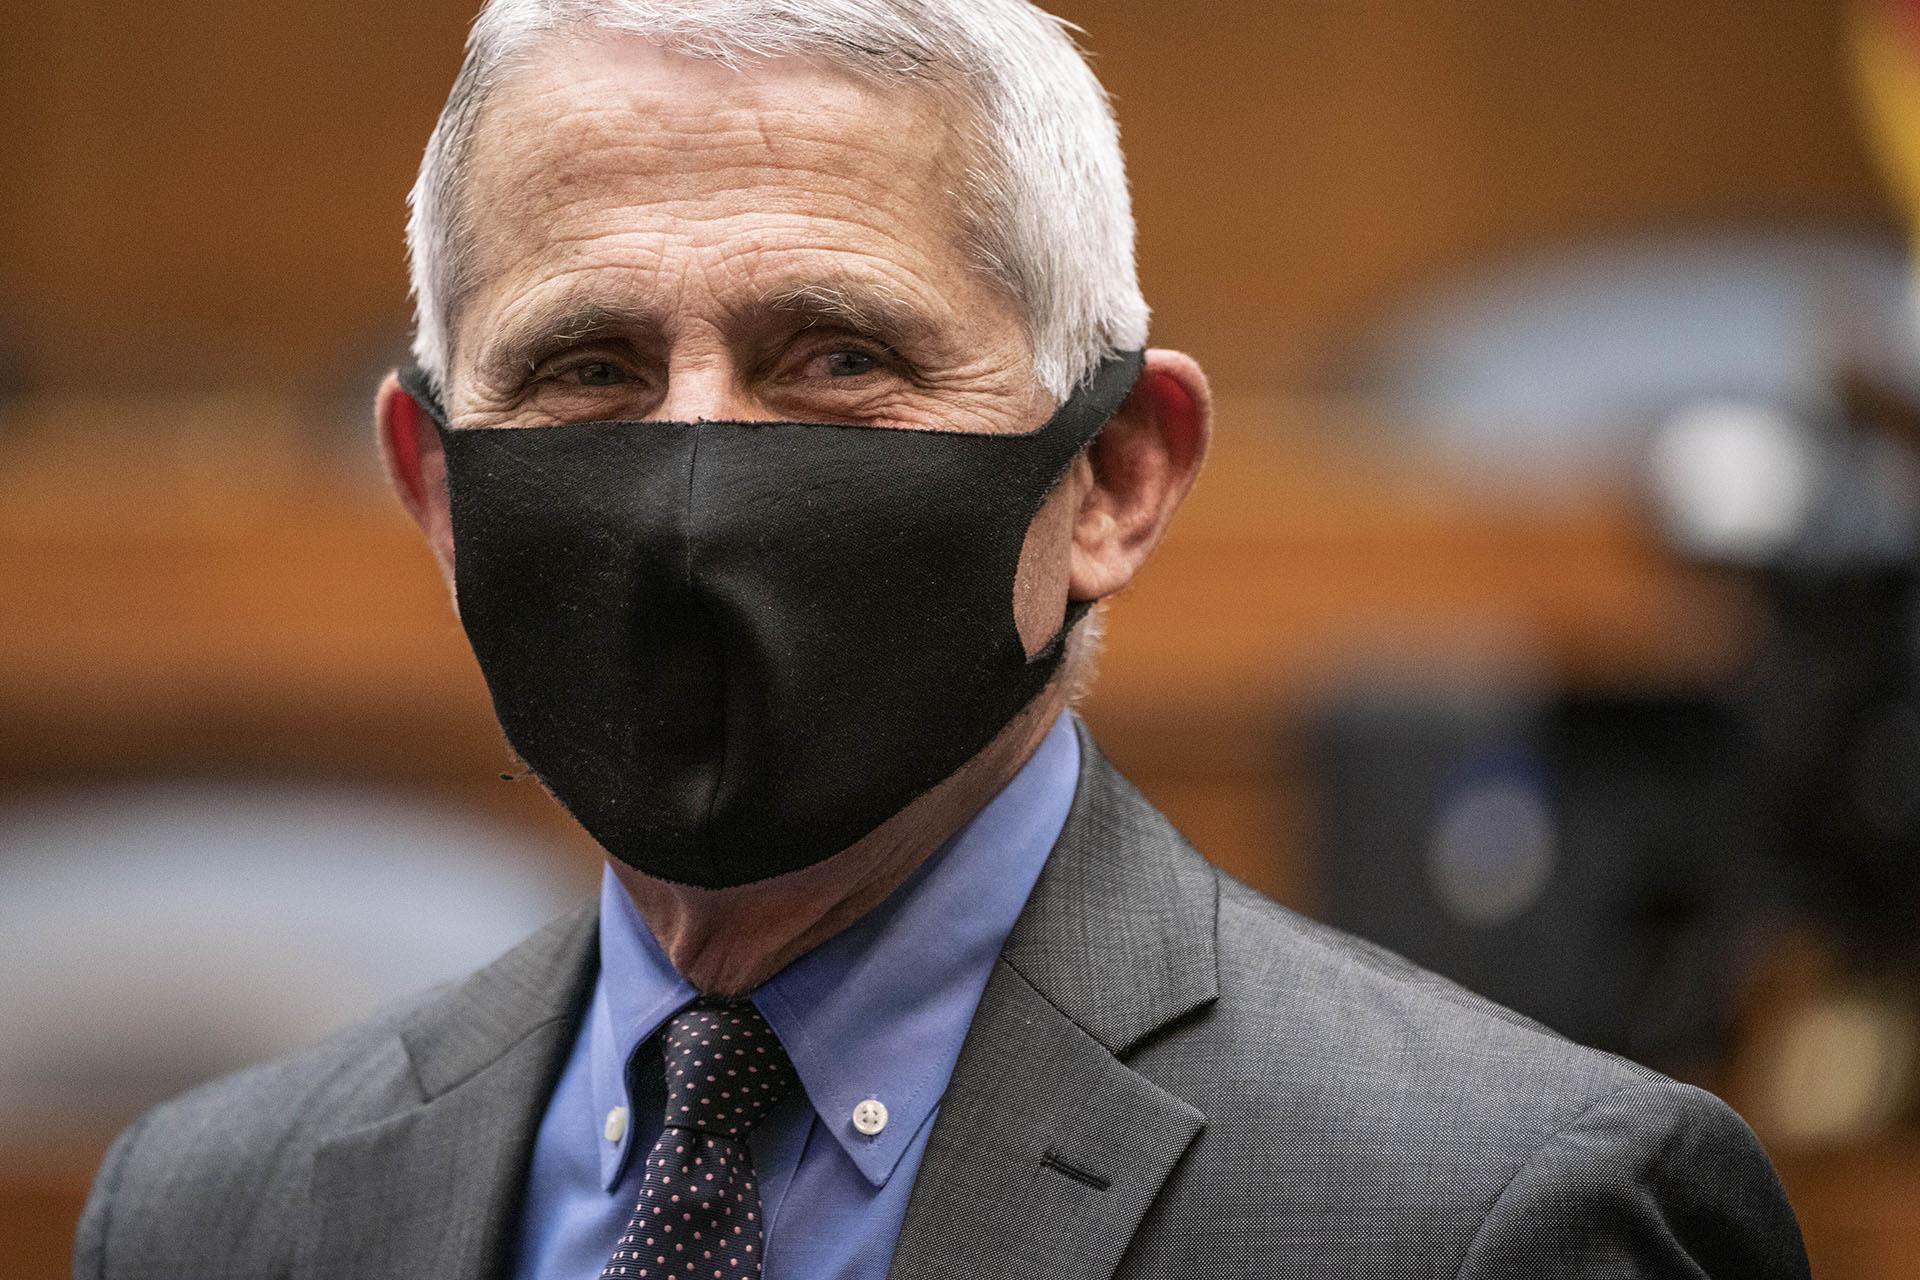 Director of the National Institute of Allergy and Infectious Diseases Dr. Anthony Fauci arrives testify before a House Committee on Energy and Commerce on the Trump administration's response to the COVID-19 pandemic on Capitol Hill in Washington on Tuesday, June 23, 2020. (Sarah Silbiger / Pool via AP)